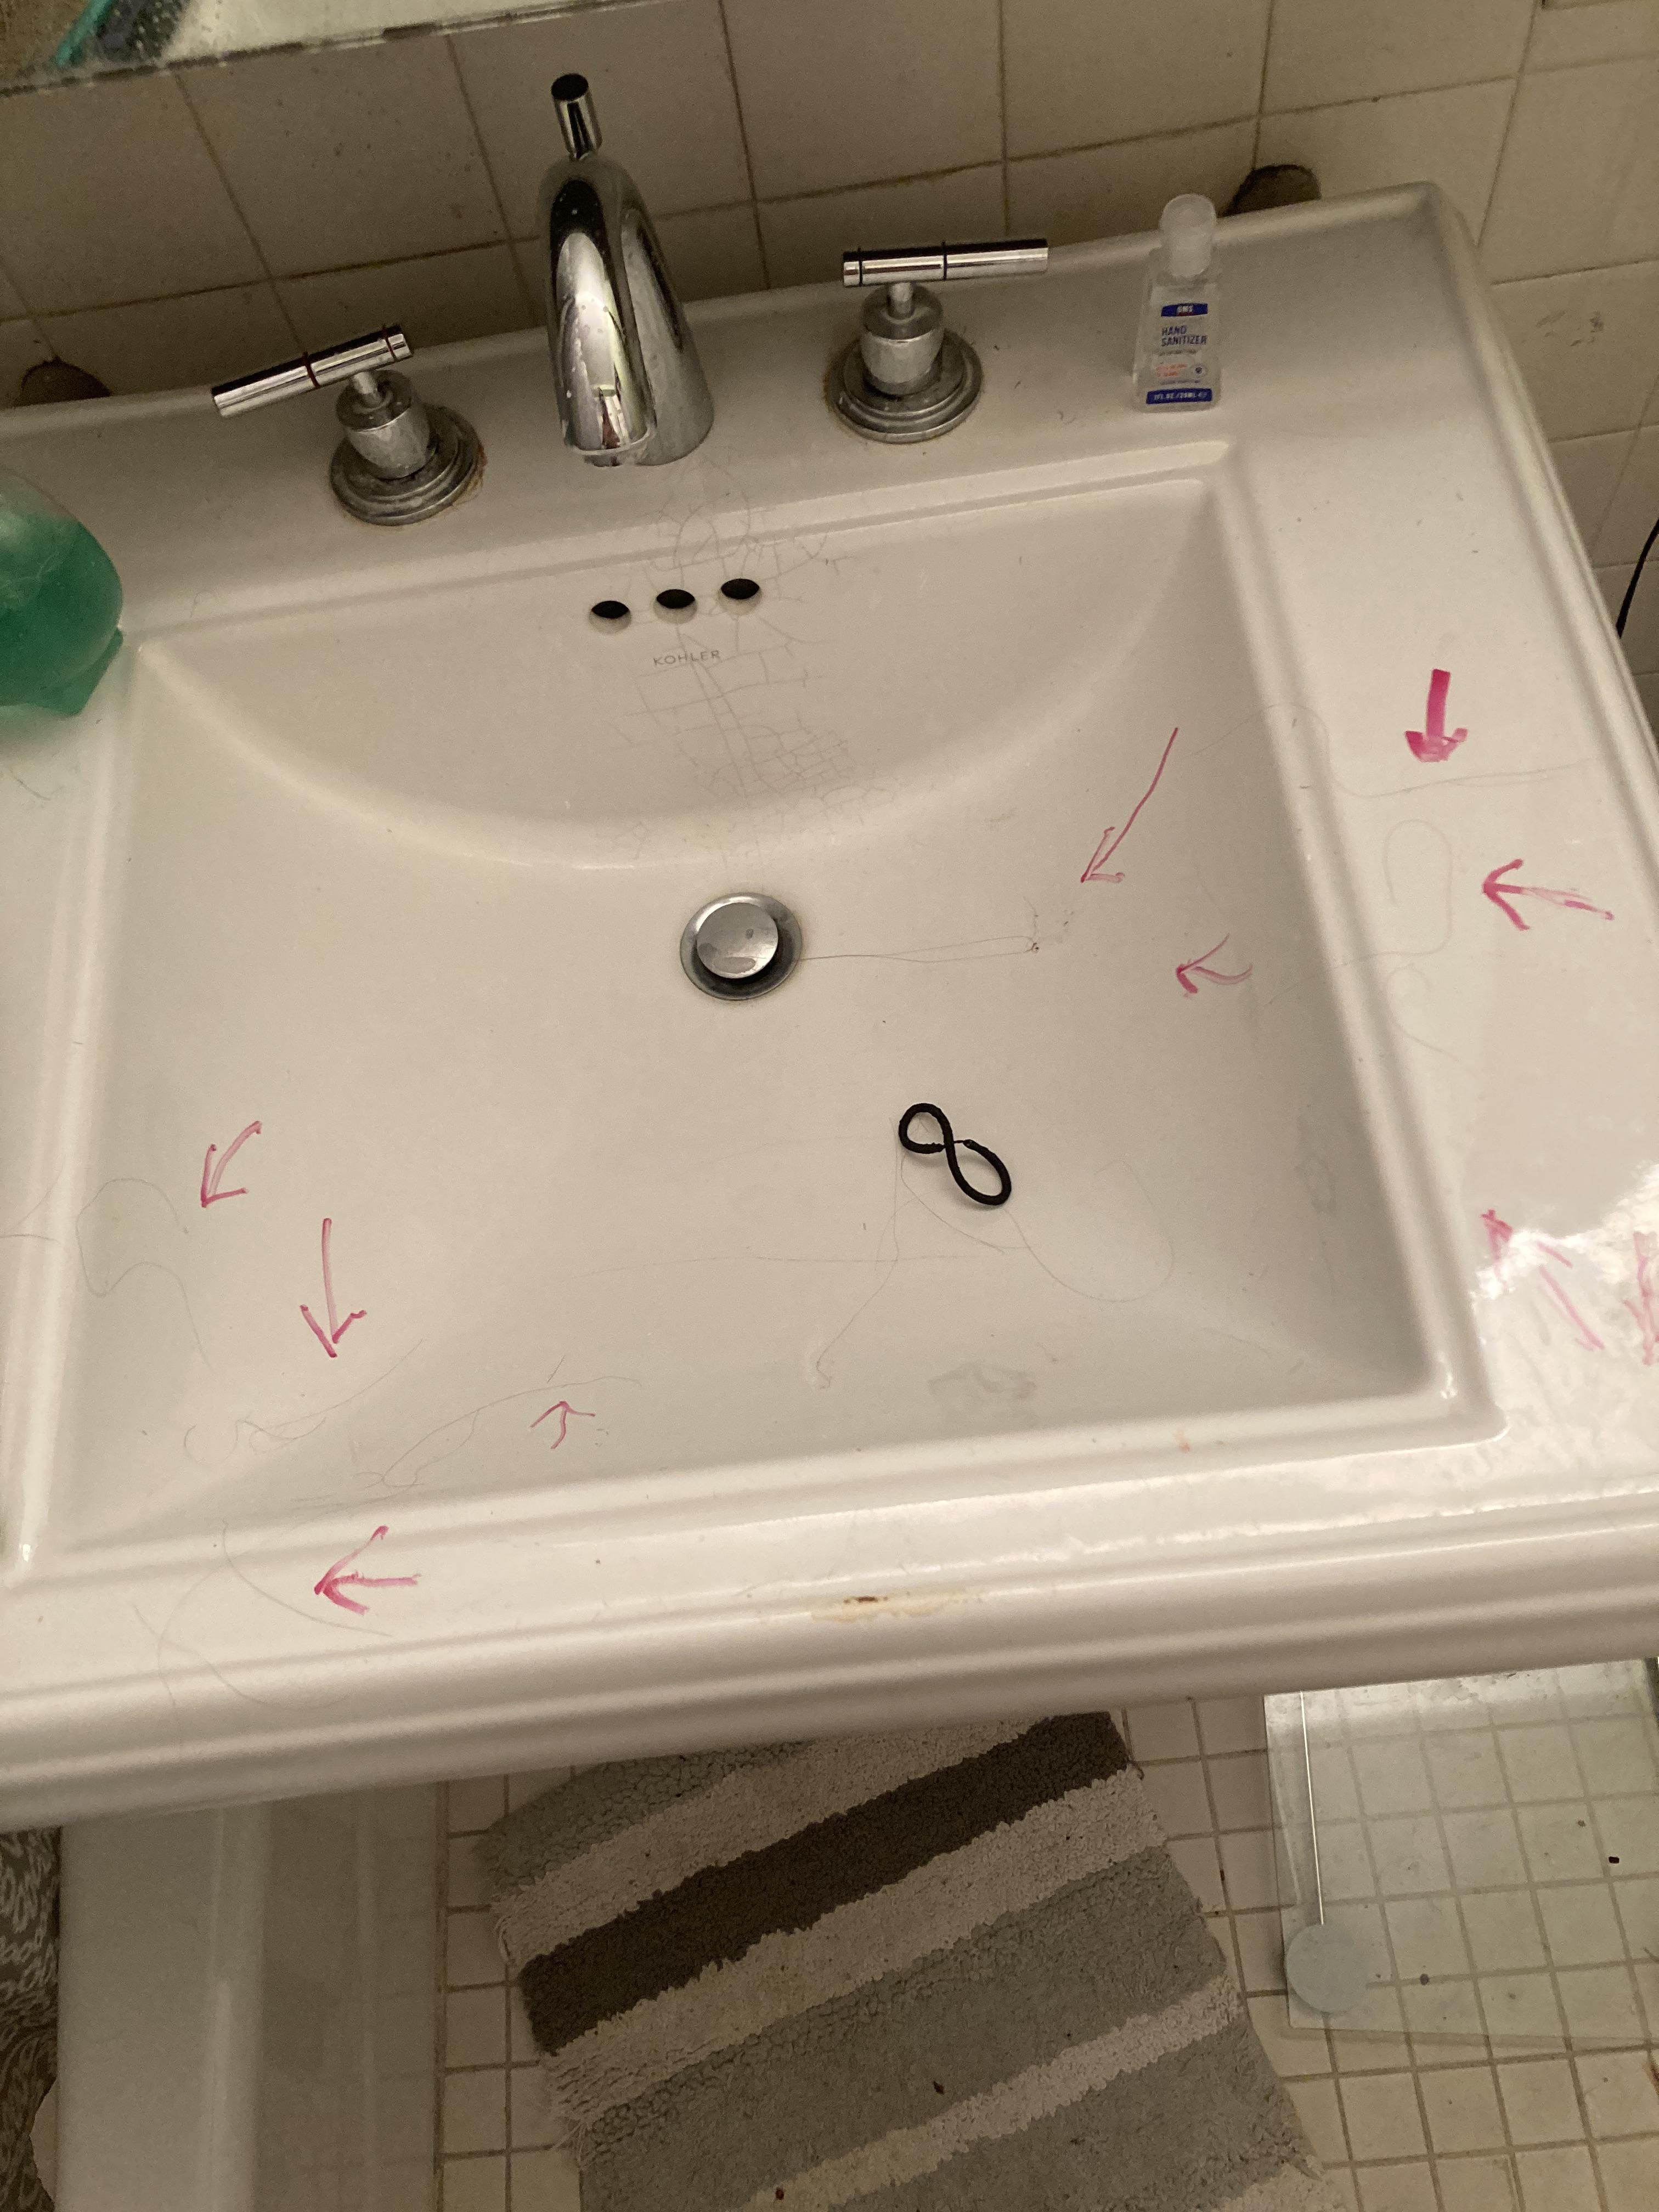 I moved in with my dad a little over a month ago. He asked me to clean my hair from the bathroom sink. I told him I didn’t know what he was talking about. This evening I came home to this.